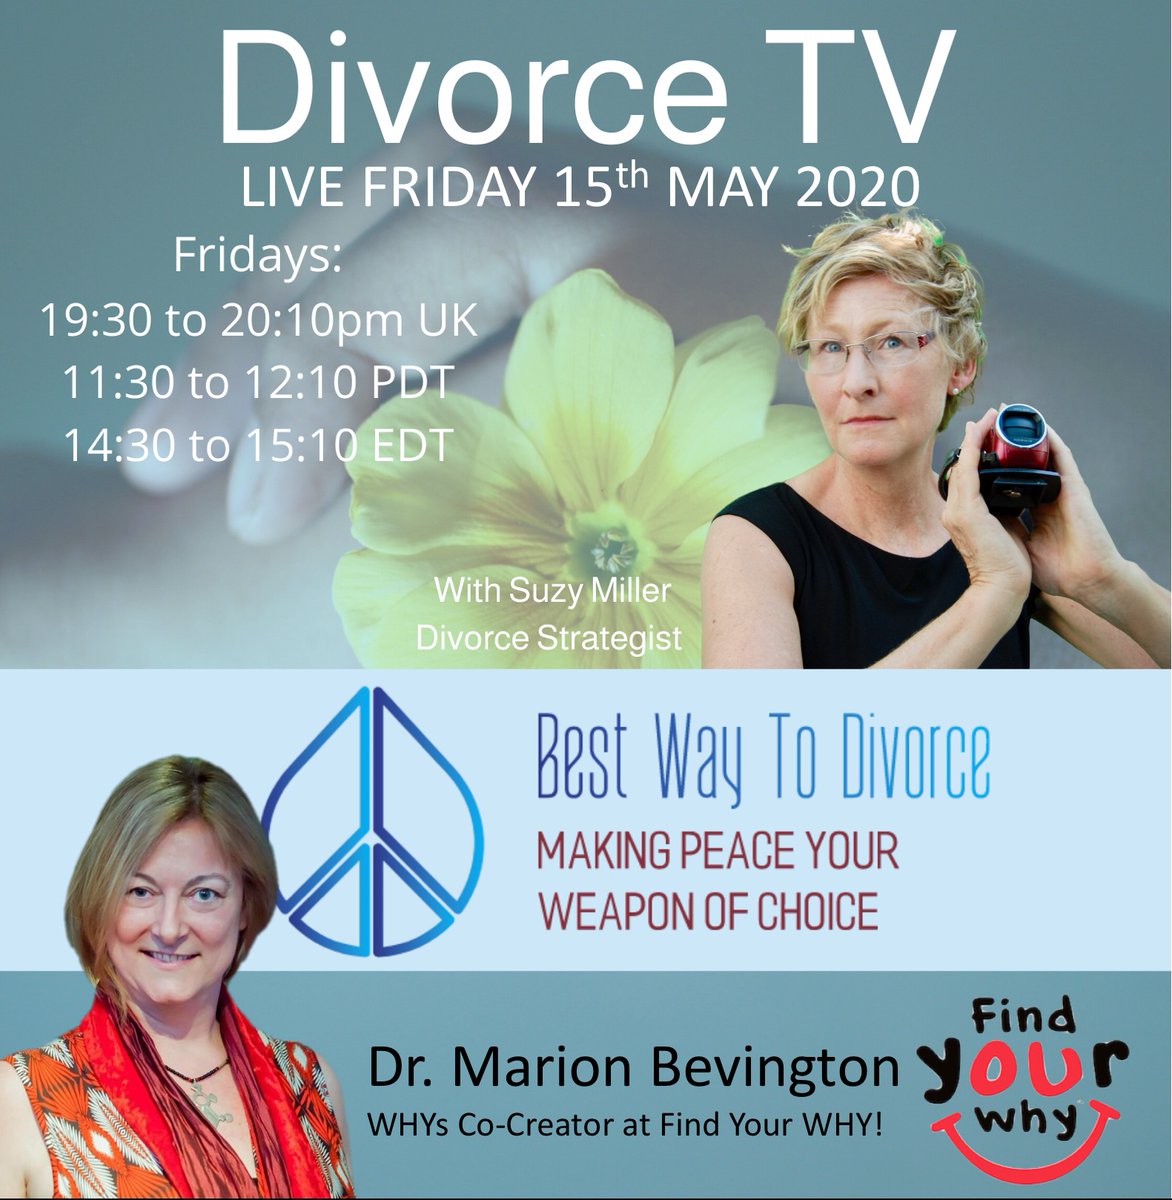 DIVORCE TV Friday 15th May 2020: 7:30pm UK time.
Our very own @MarionBevington and the amazing @StartOverSuzy Suzy Miller and “Disney DAD” @DisneyDadShow Robert aguilar Jr.
Fear around #Divorce, #family finances?

#divorcestrategist #helpseparatedfamilies

suzymiller.synduit.com/FTWP0001